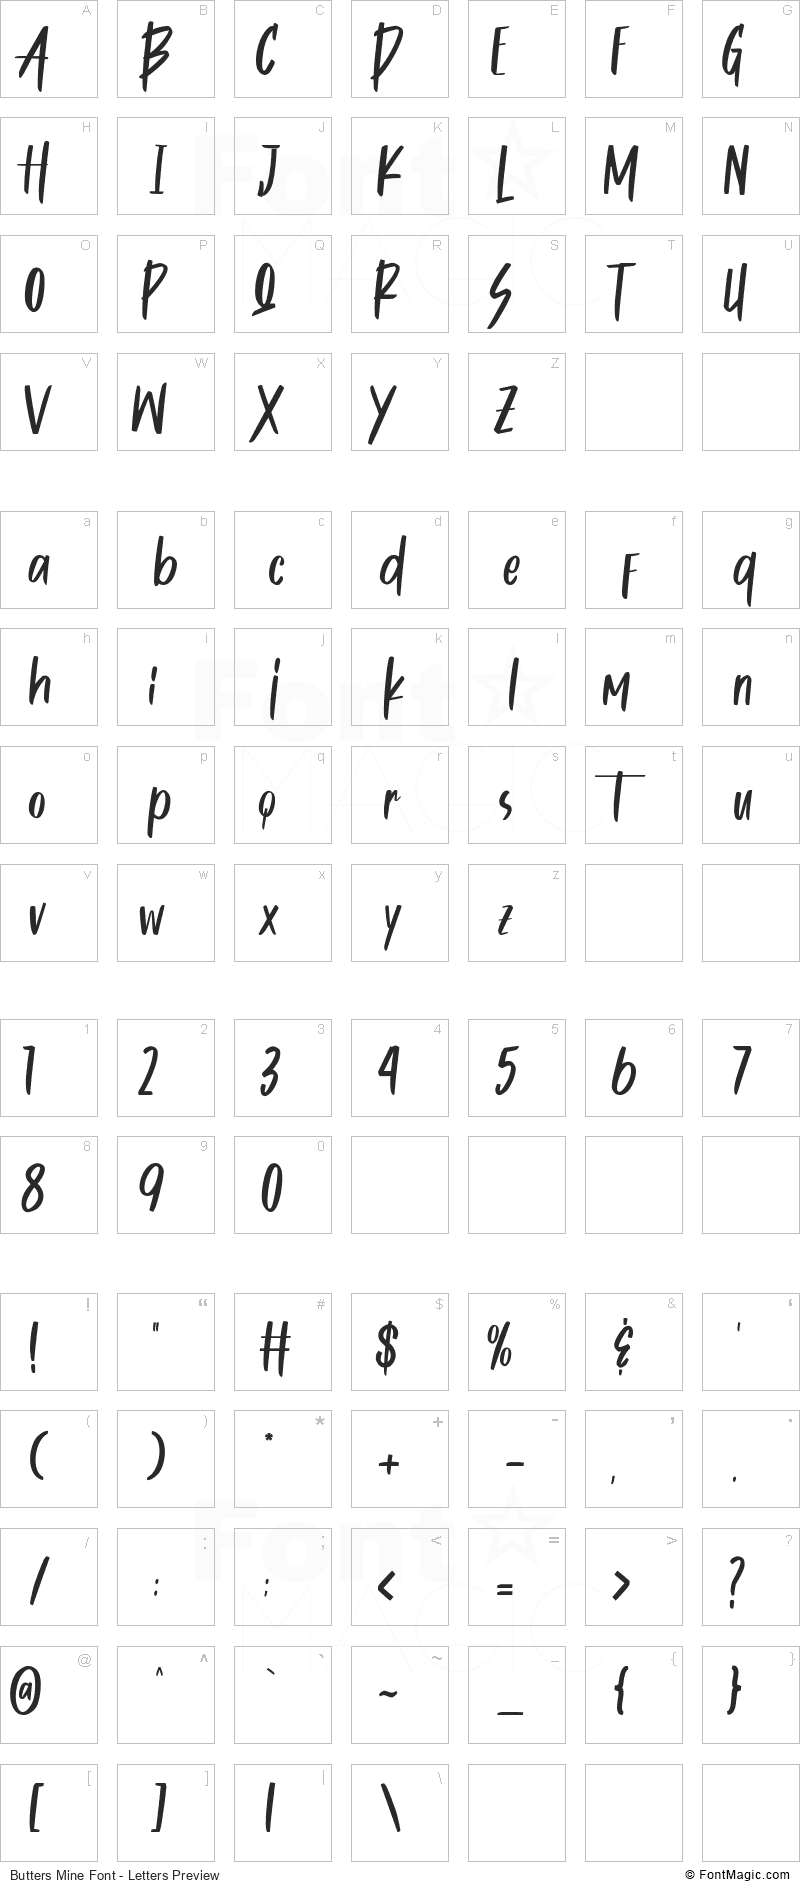 Butters Mine Font - All Latters Preview Chart